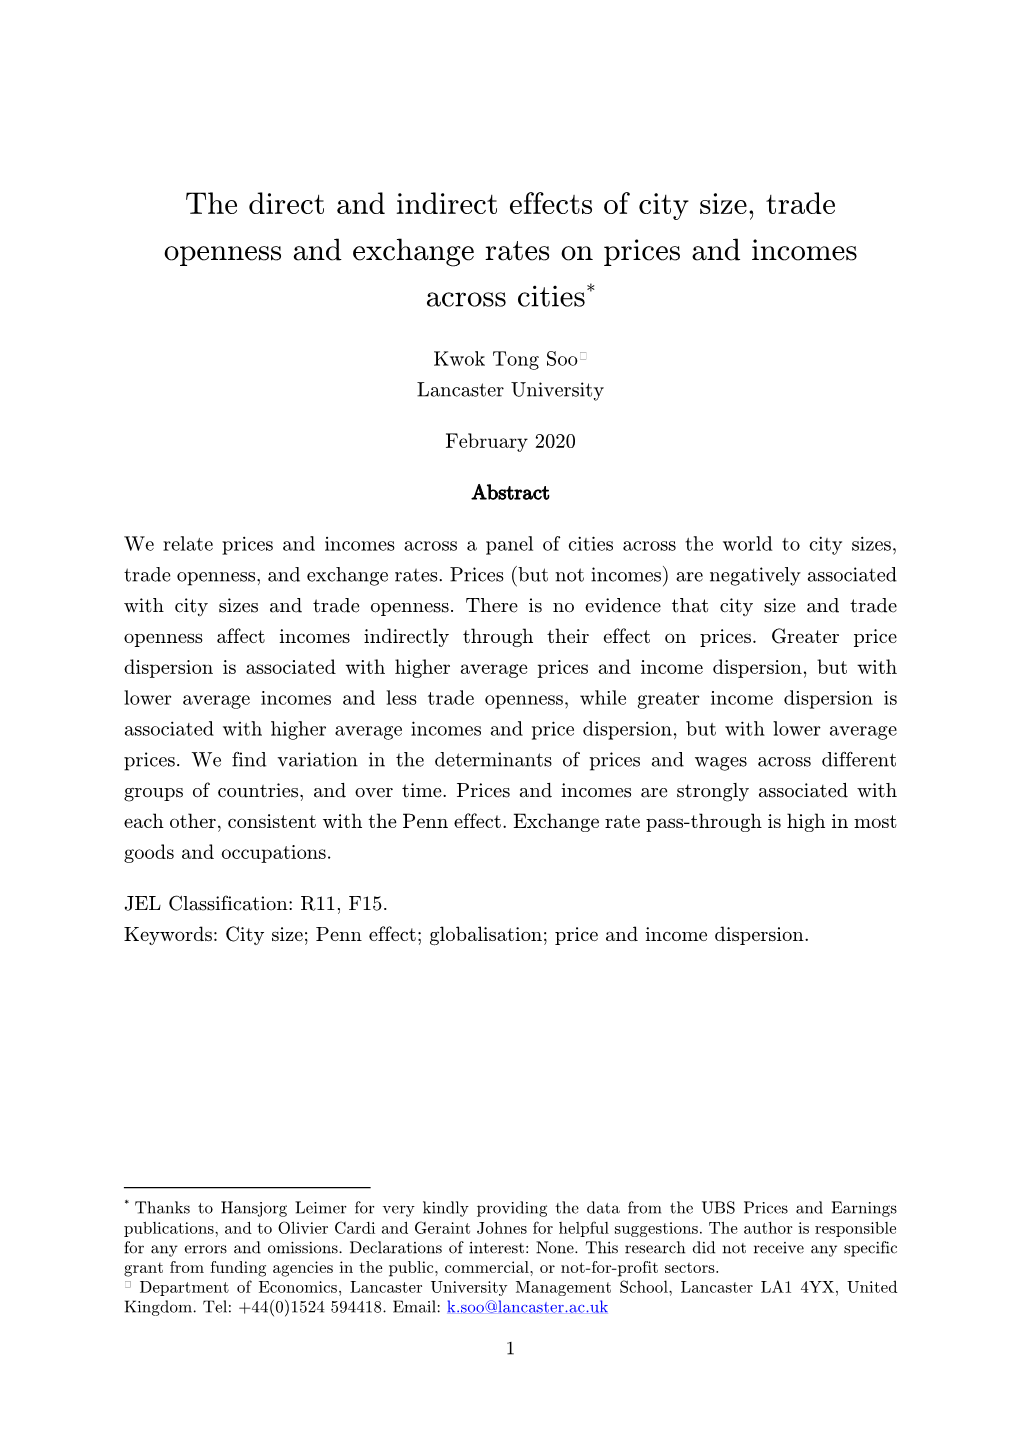 The Direct and Indirect Effects of City Size, Trade Openness and Exchange Rates on Prices and Incomes Across Cities*